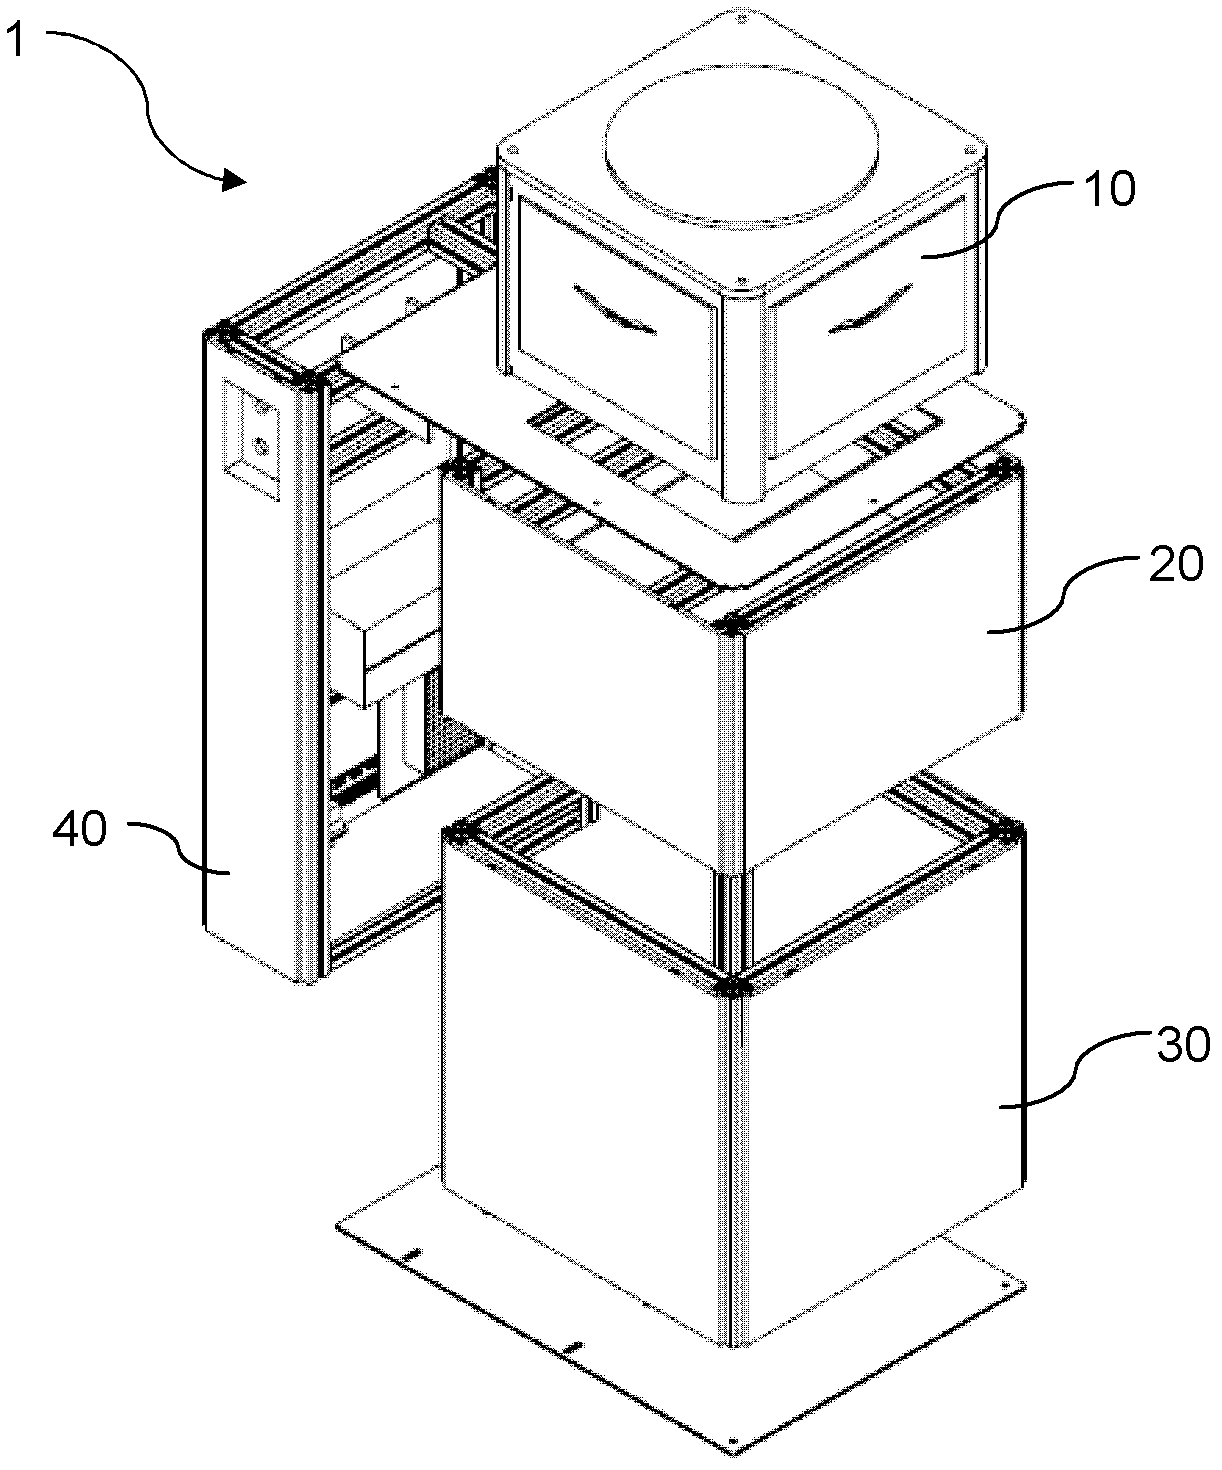 Modularized semiconductor processing device